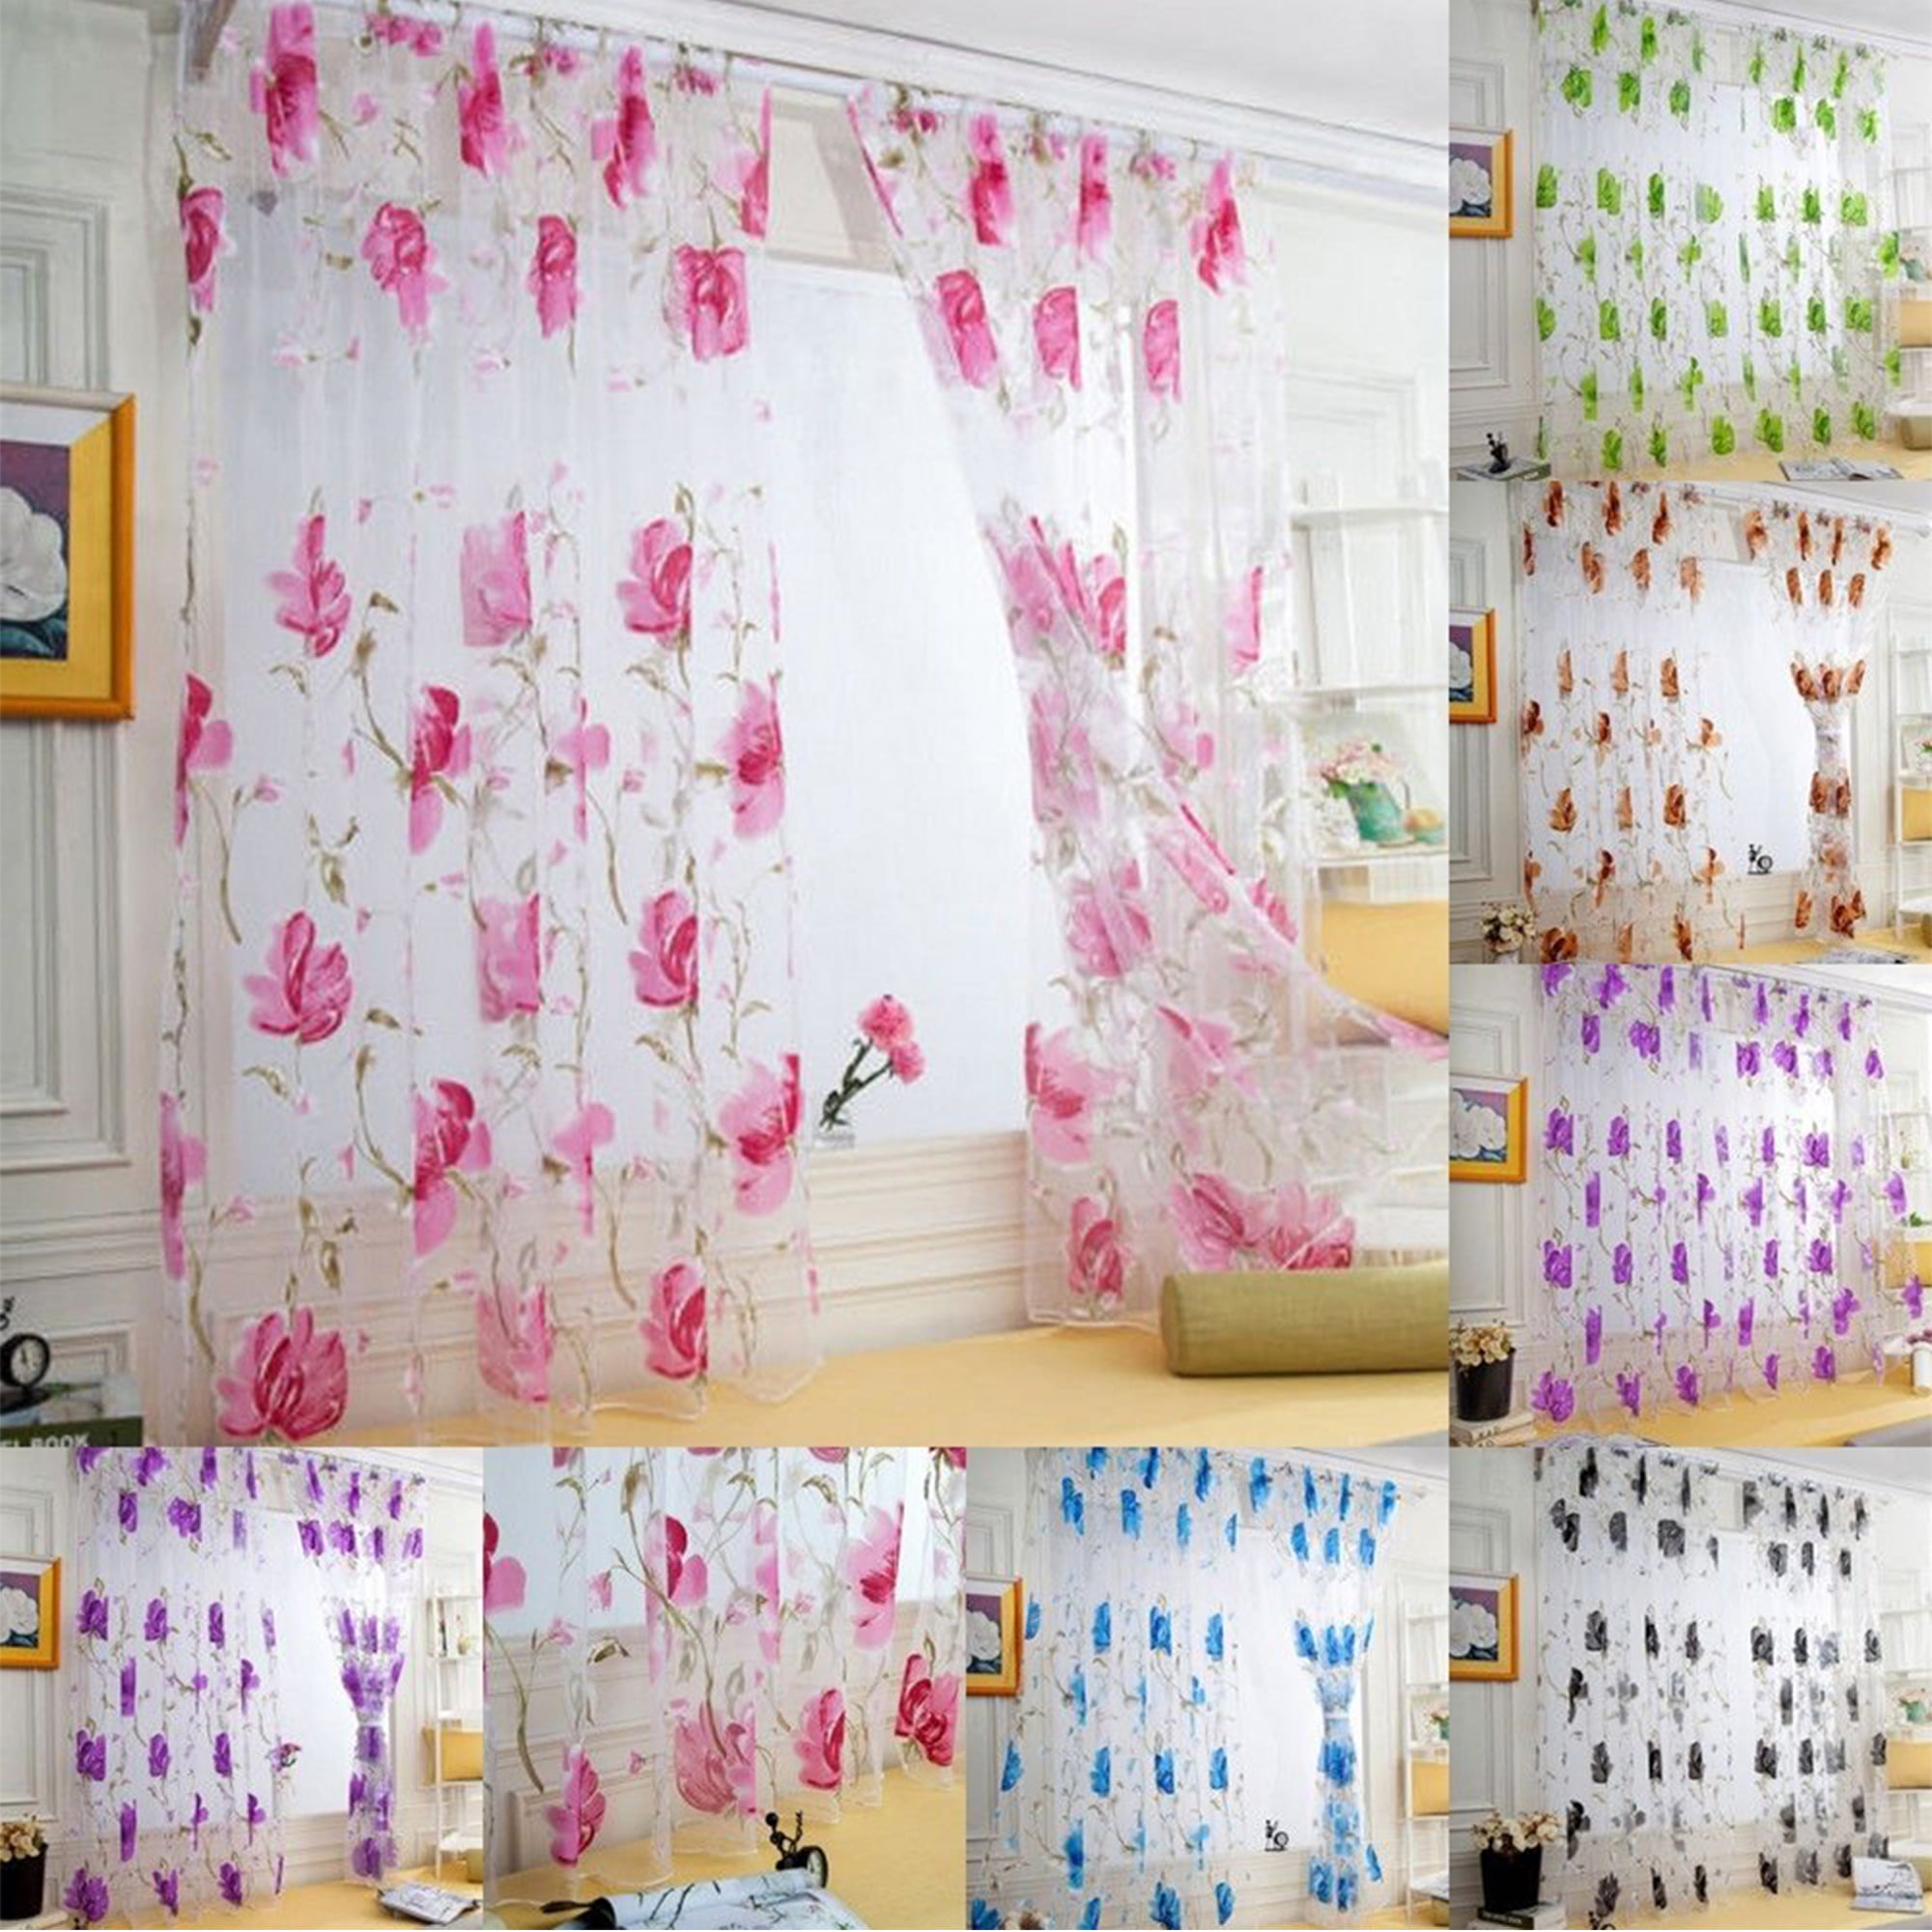 Textured Sheer Tulle Curtain Panels Solid Sheer Simple Nordic Voile Drape 1Panel 